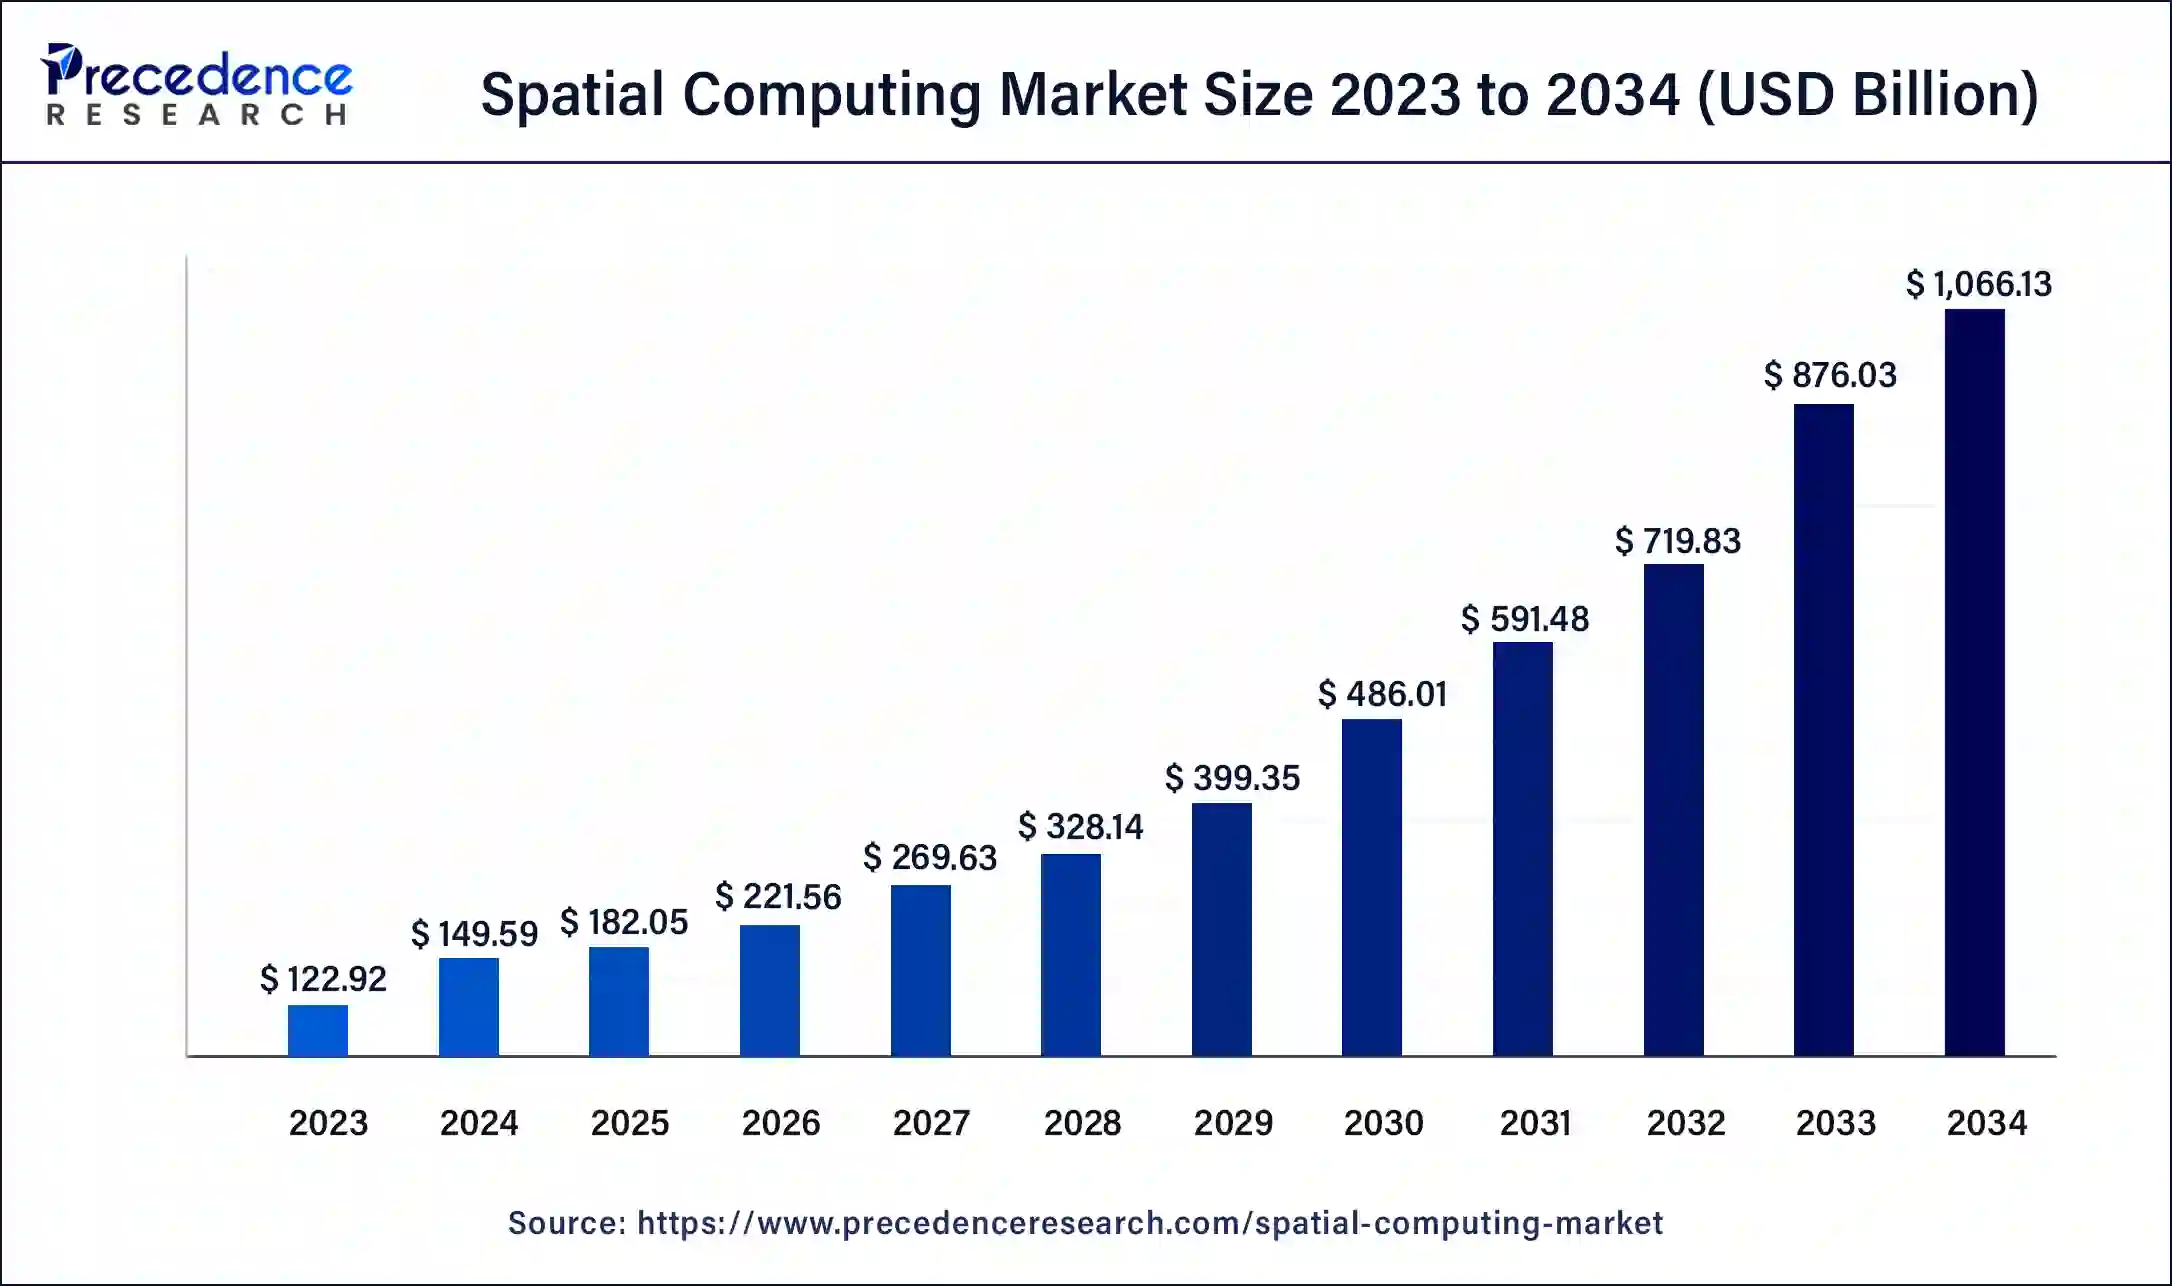 Spatial Computing Market Size 2024 to 2034